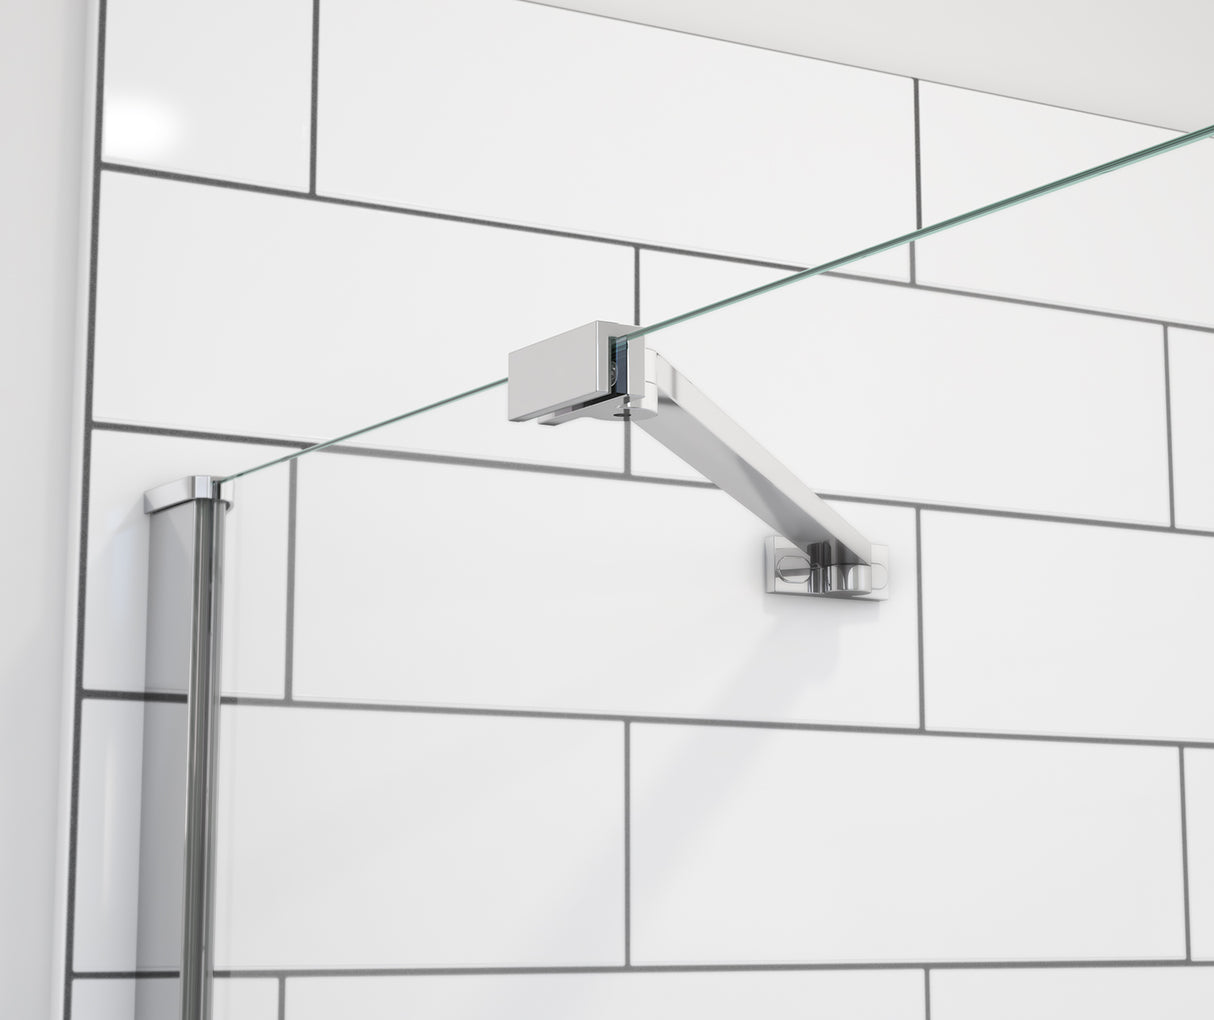 MAAX 139578-900-084-000 Reveal Sleek 71 44-47 x 71 ½ in. 8mm Pivot Shower Door for Alcove Installation with Clear glass in Chrome